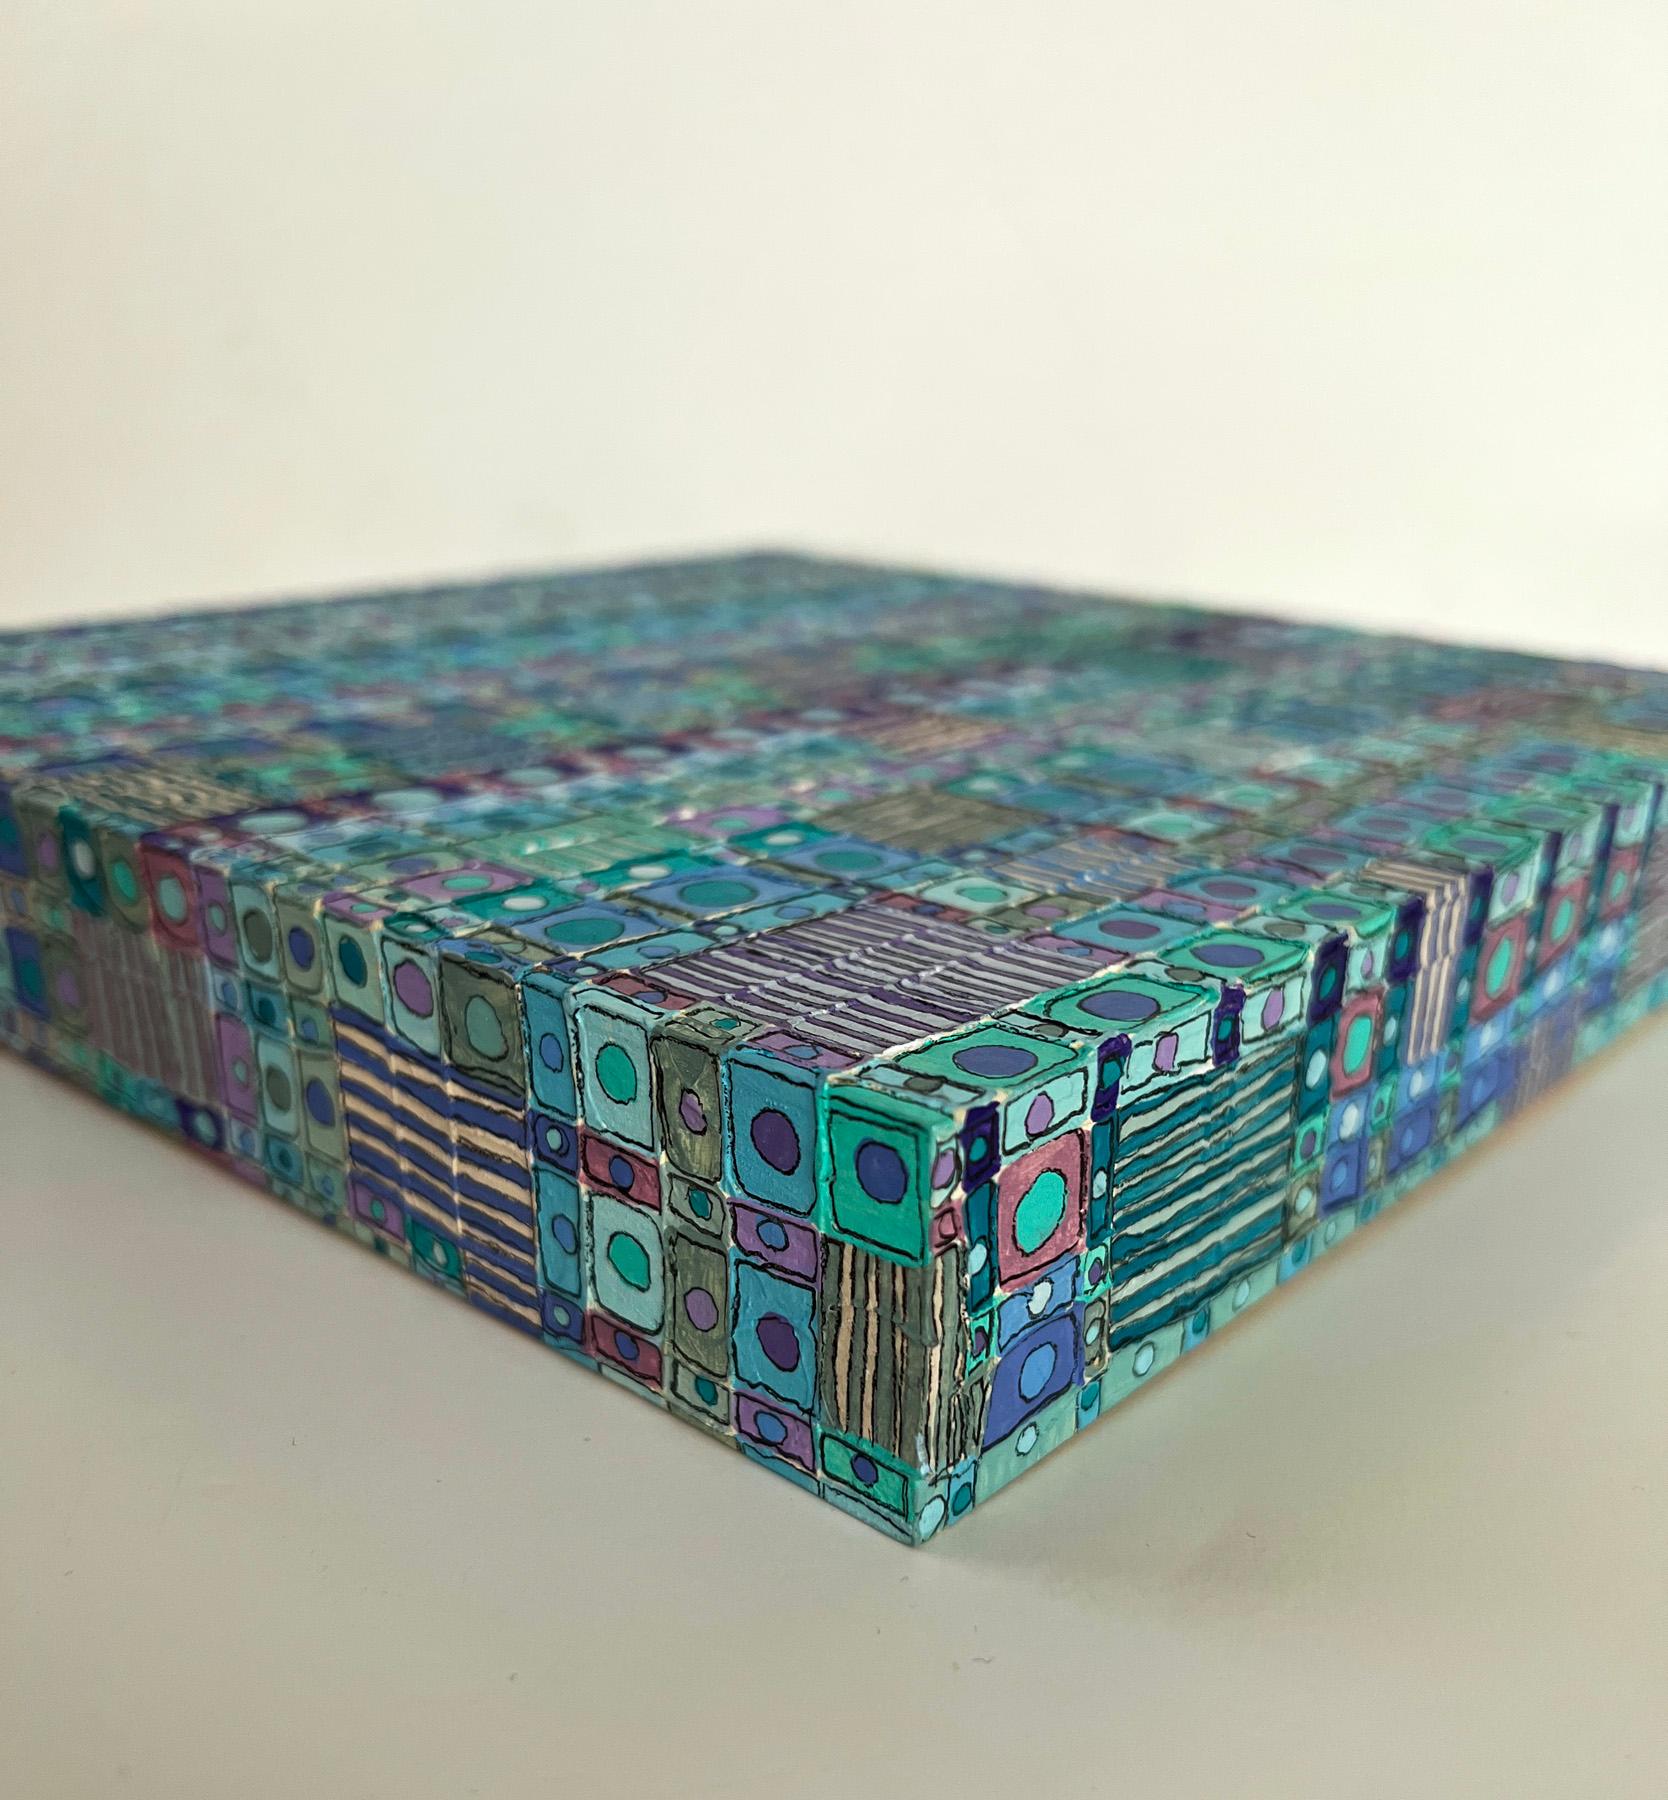 <p>Artist Comments<br>Artist Terri Bell demonstrates a patterned abstract piece consisting of spheres enclosed in cubes. She envisions an ode to dreaming of simpler times living in a small city apartment as time goes by. A bright periwinkle palette